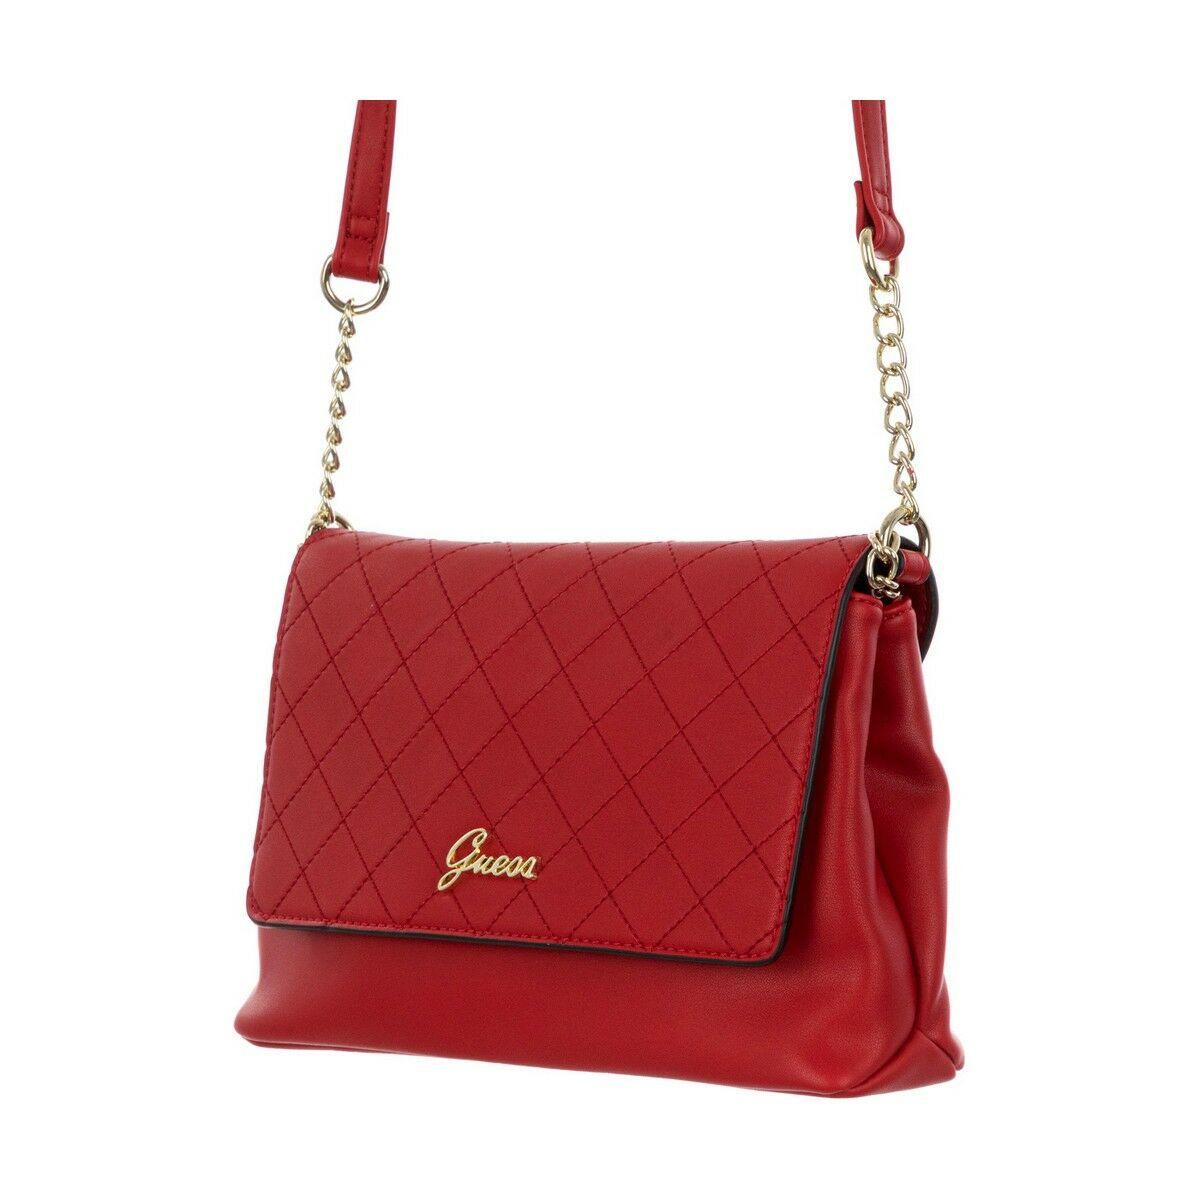 Guess Women's Going Out Bag - Red